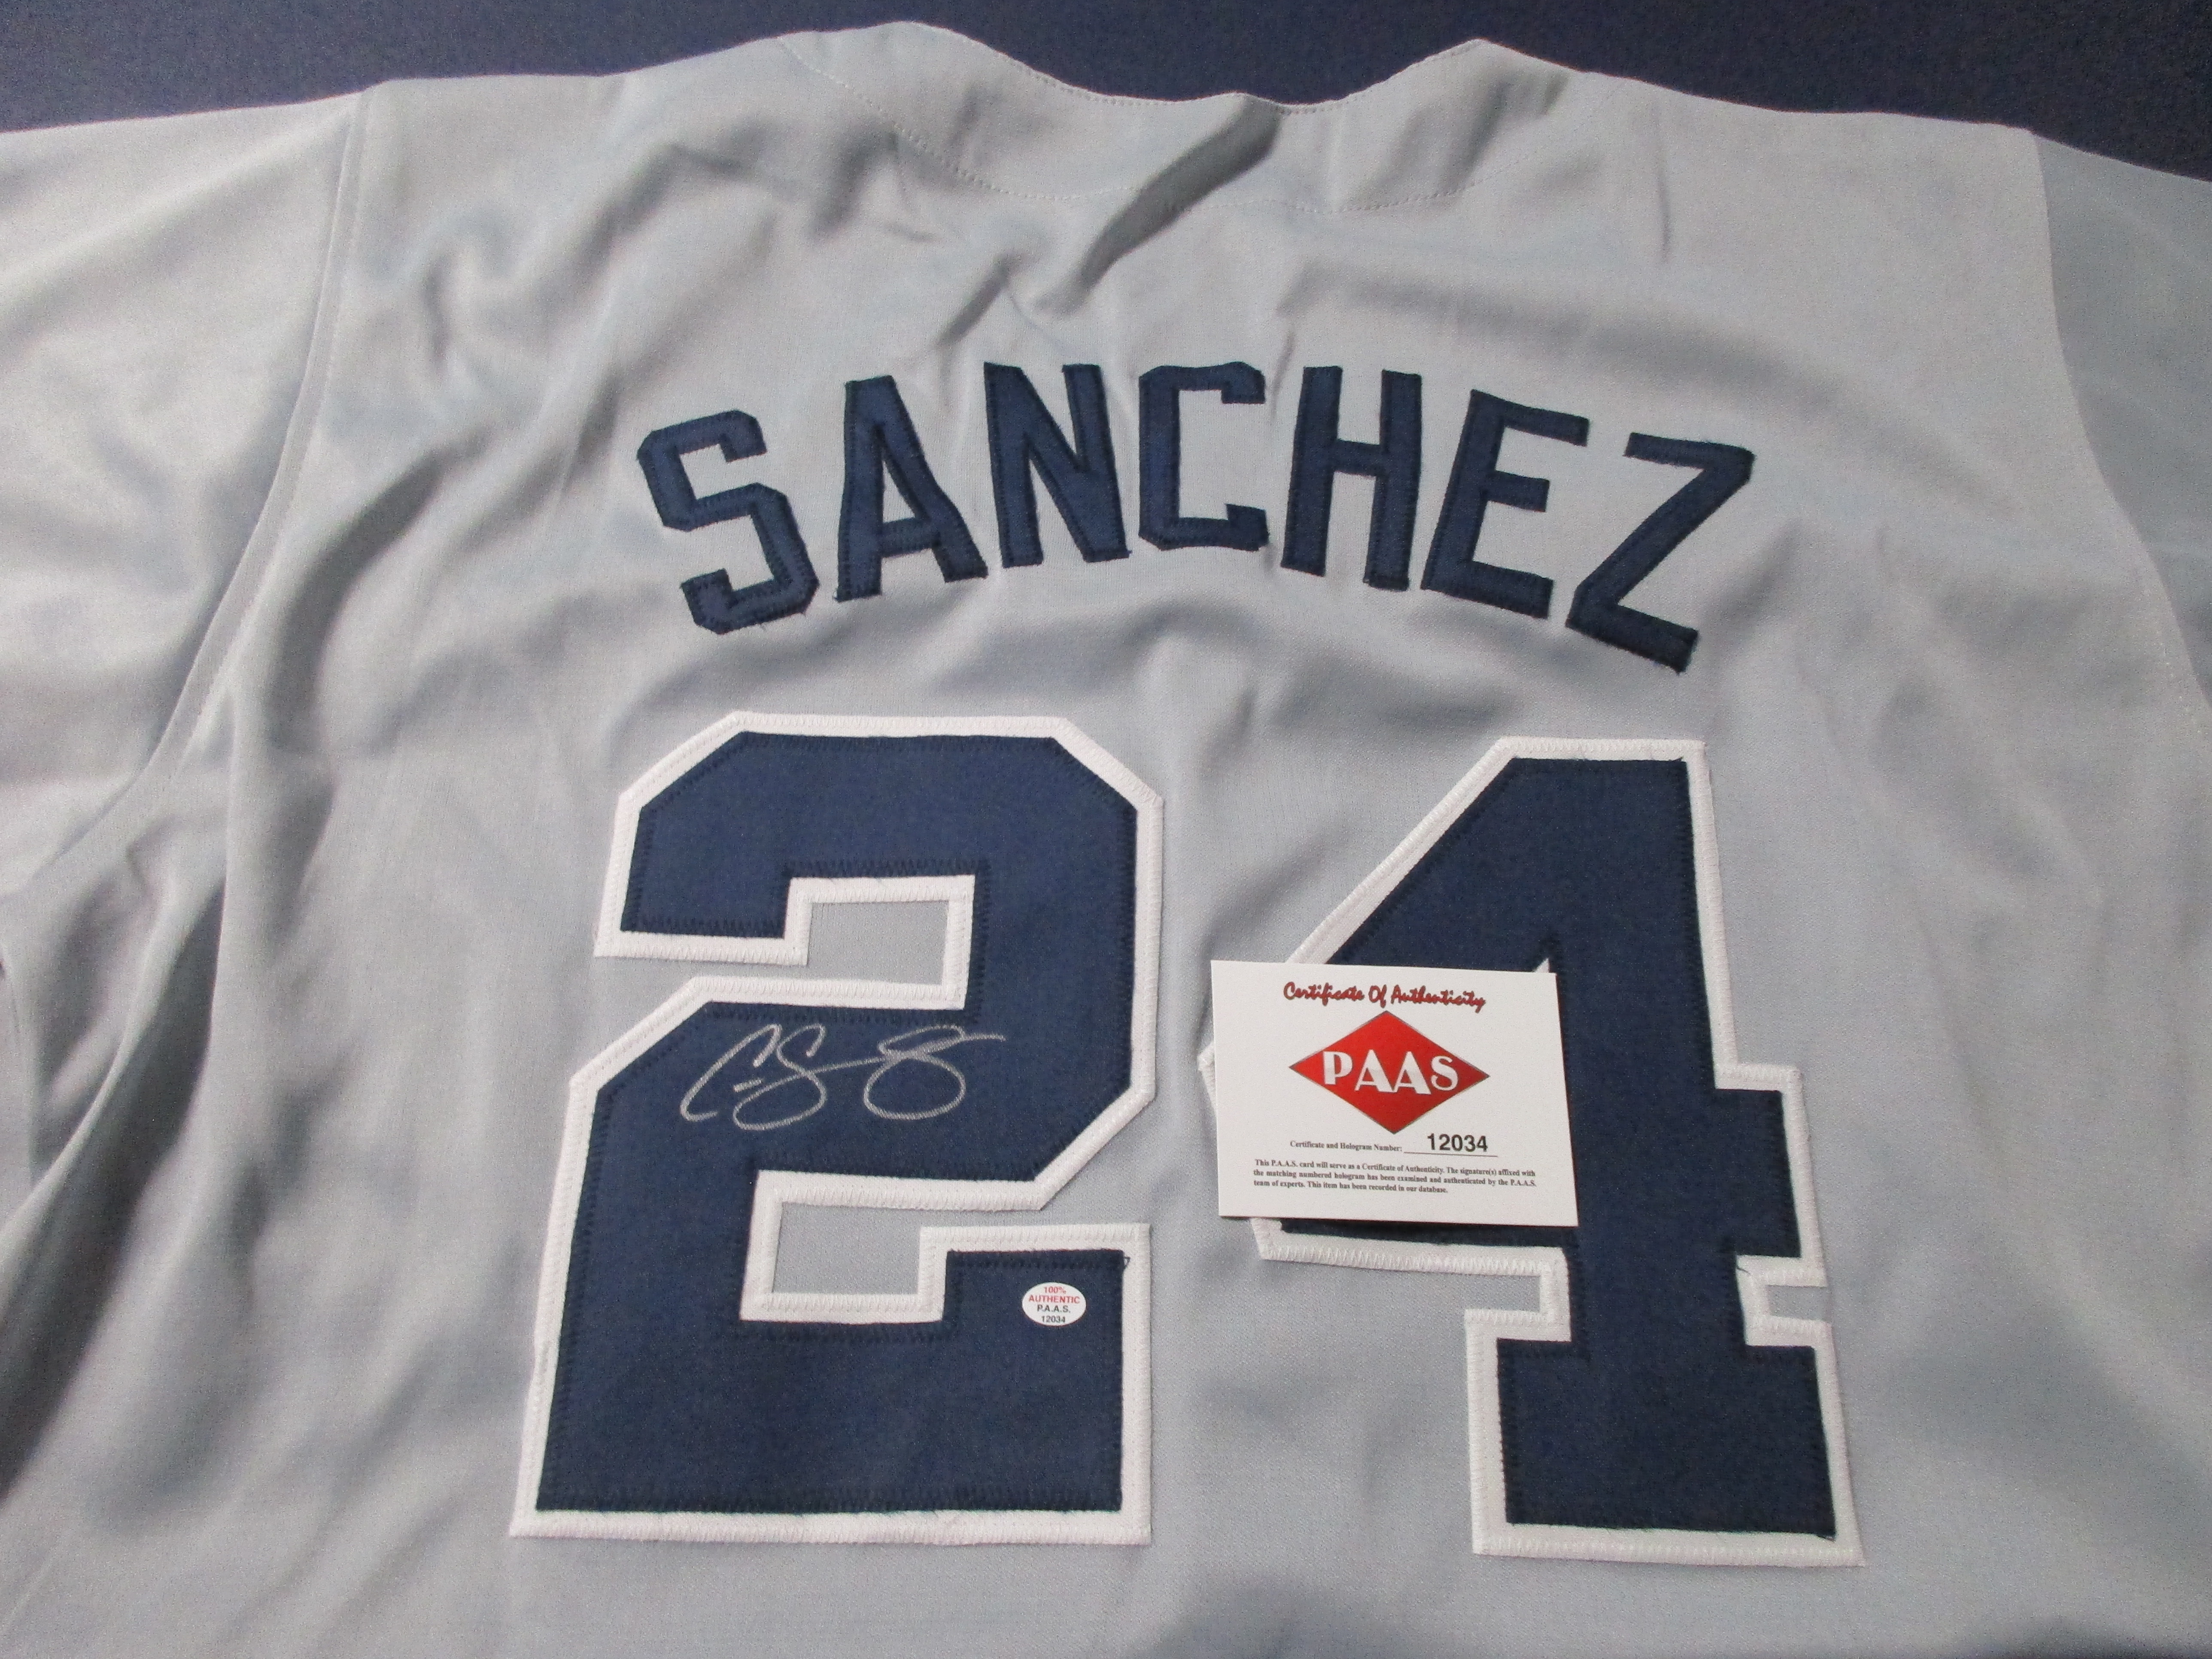 Gary Sanchez Signed Limited Edition Yankees Jersey Inscribed 1st